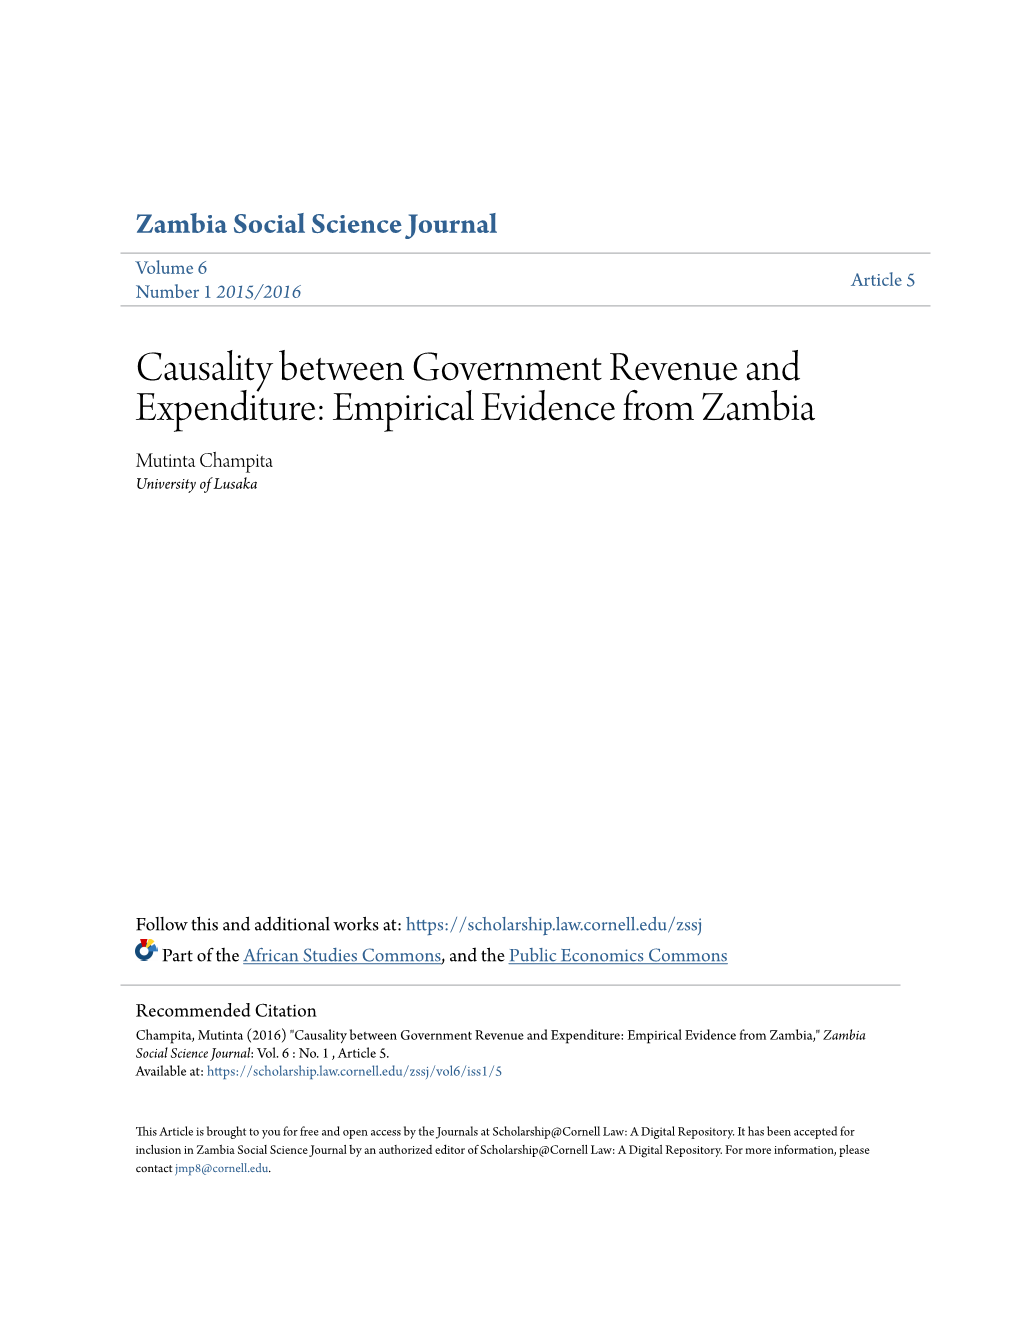 Causality Between Government Revenue and Expenditure: Empirical Evidence from Zambia Mutinta Champita University of Lusaka